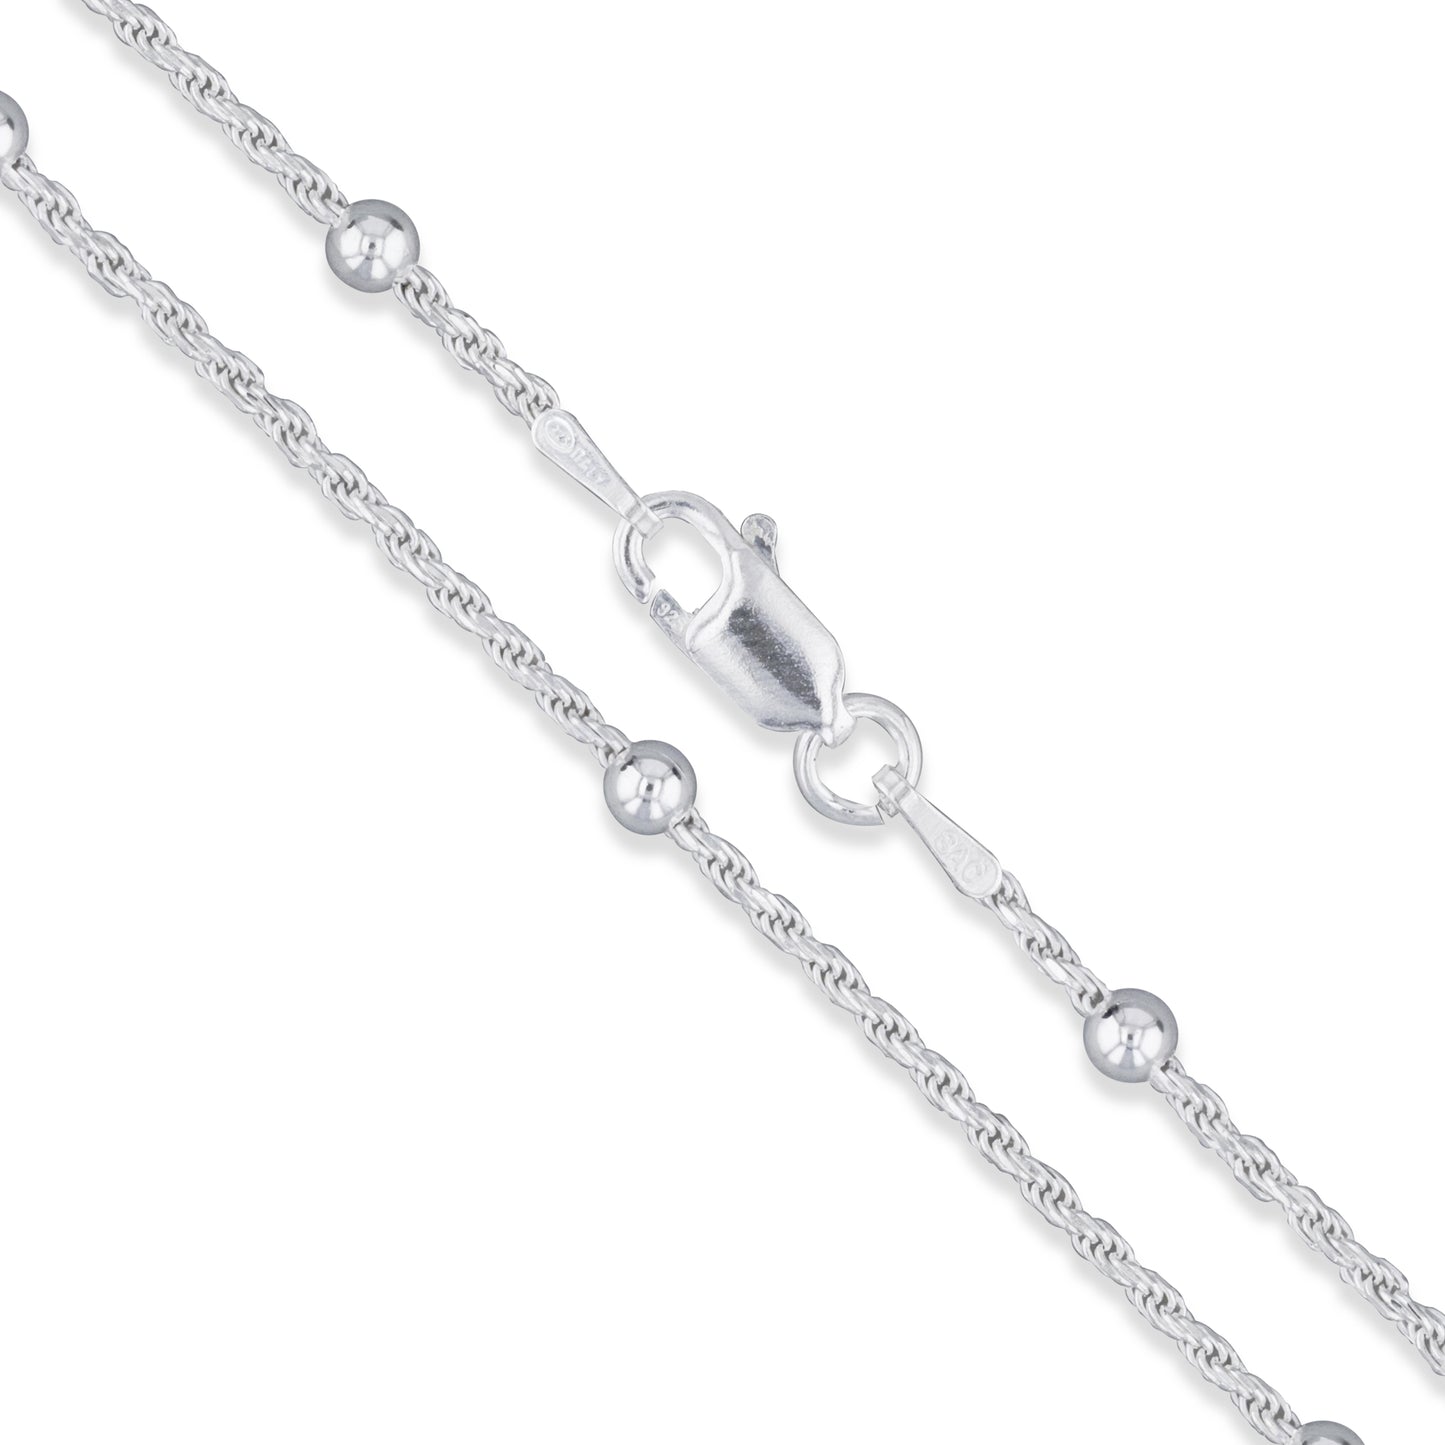 Sterling Silver Diamond-Cut Rope Bead Chain 1.5mm Solid 925 Italy New Necklace